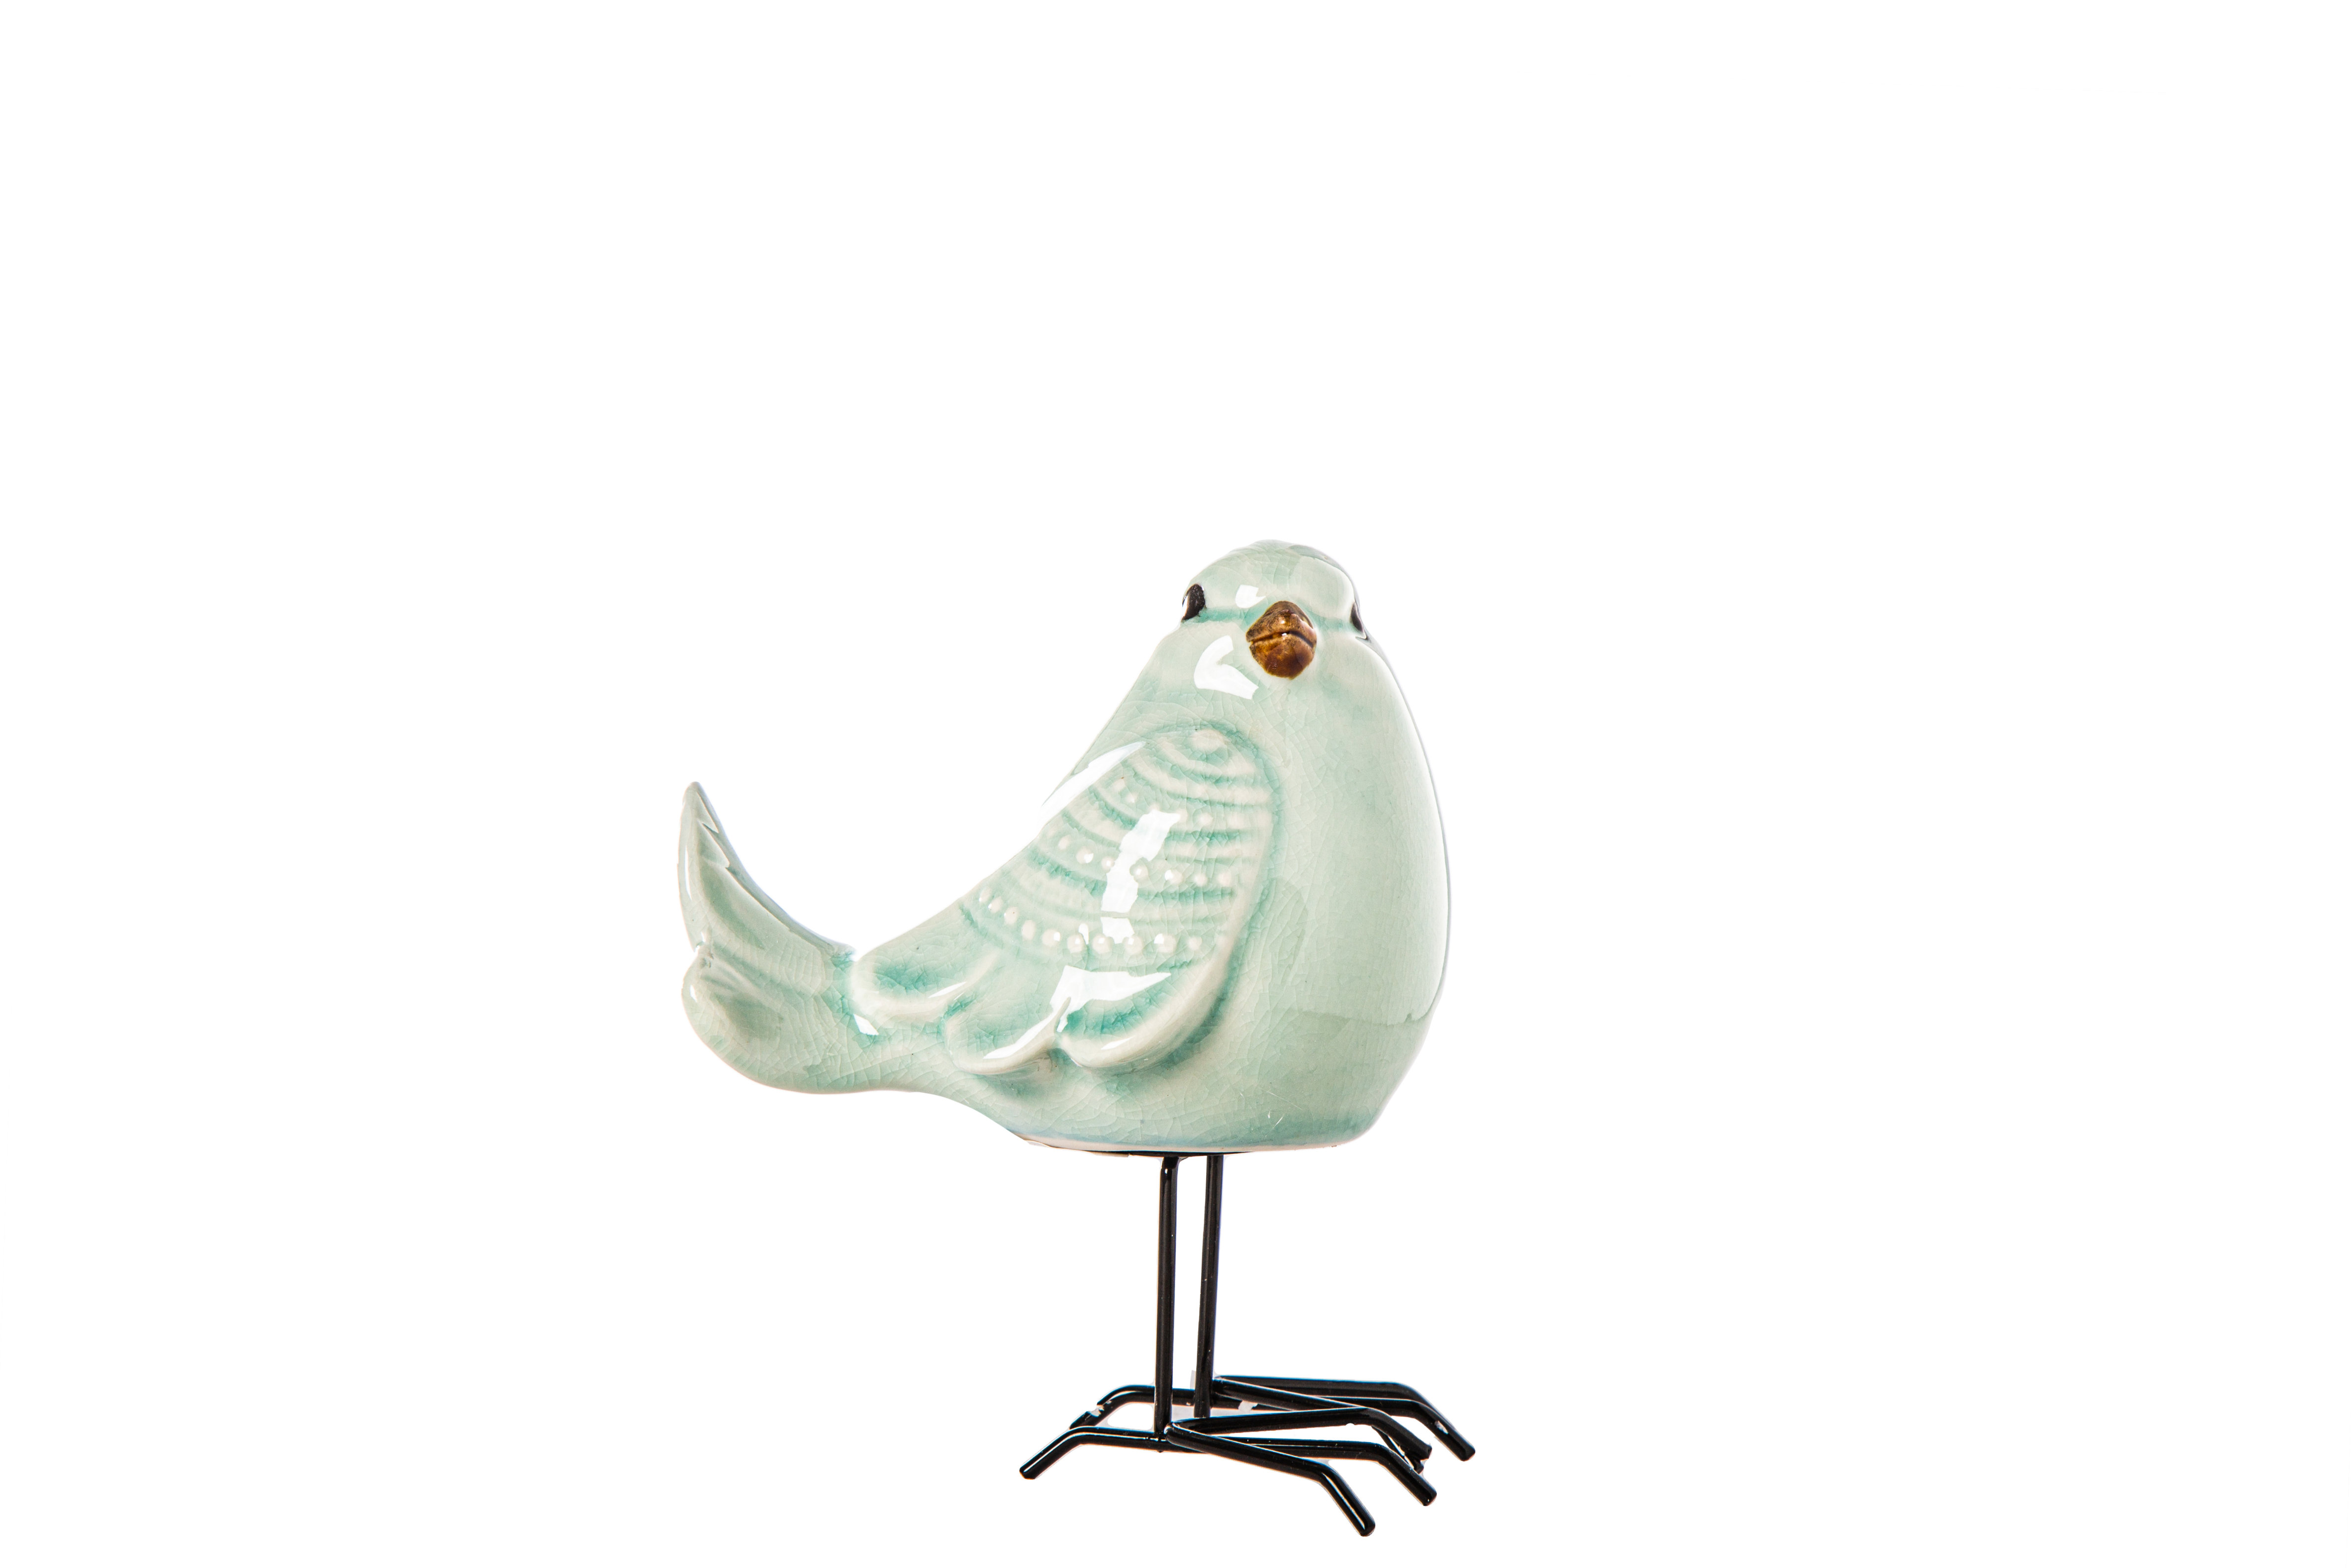 Big-billed Bird Crystal Figurines Animal Collection Paperweight Home Decor Gifts